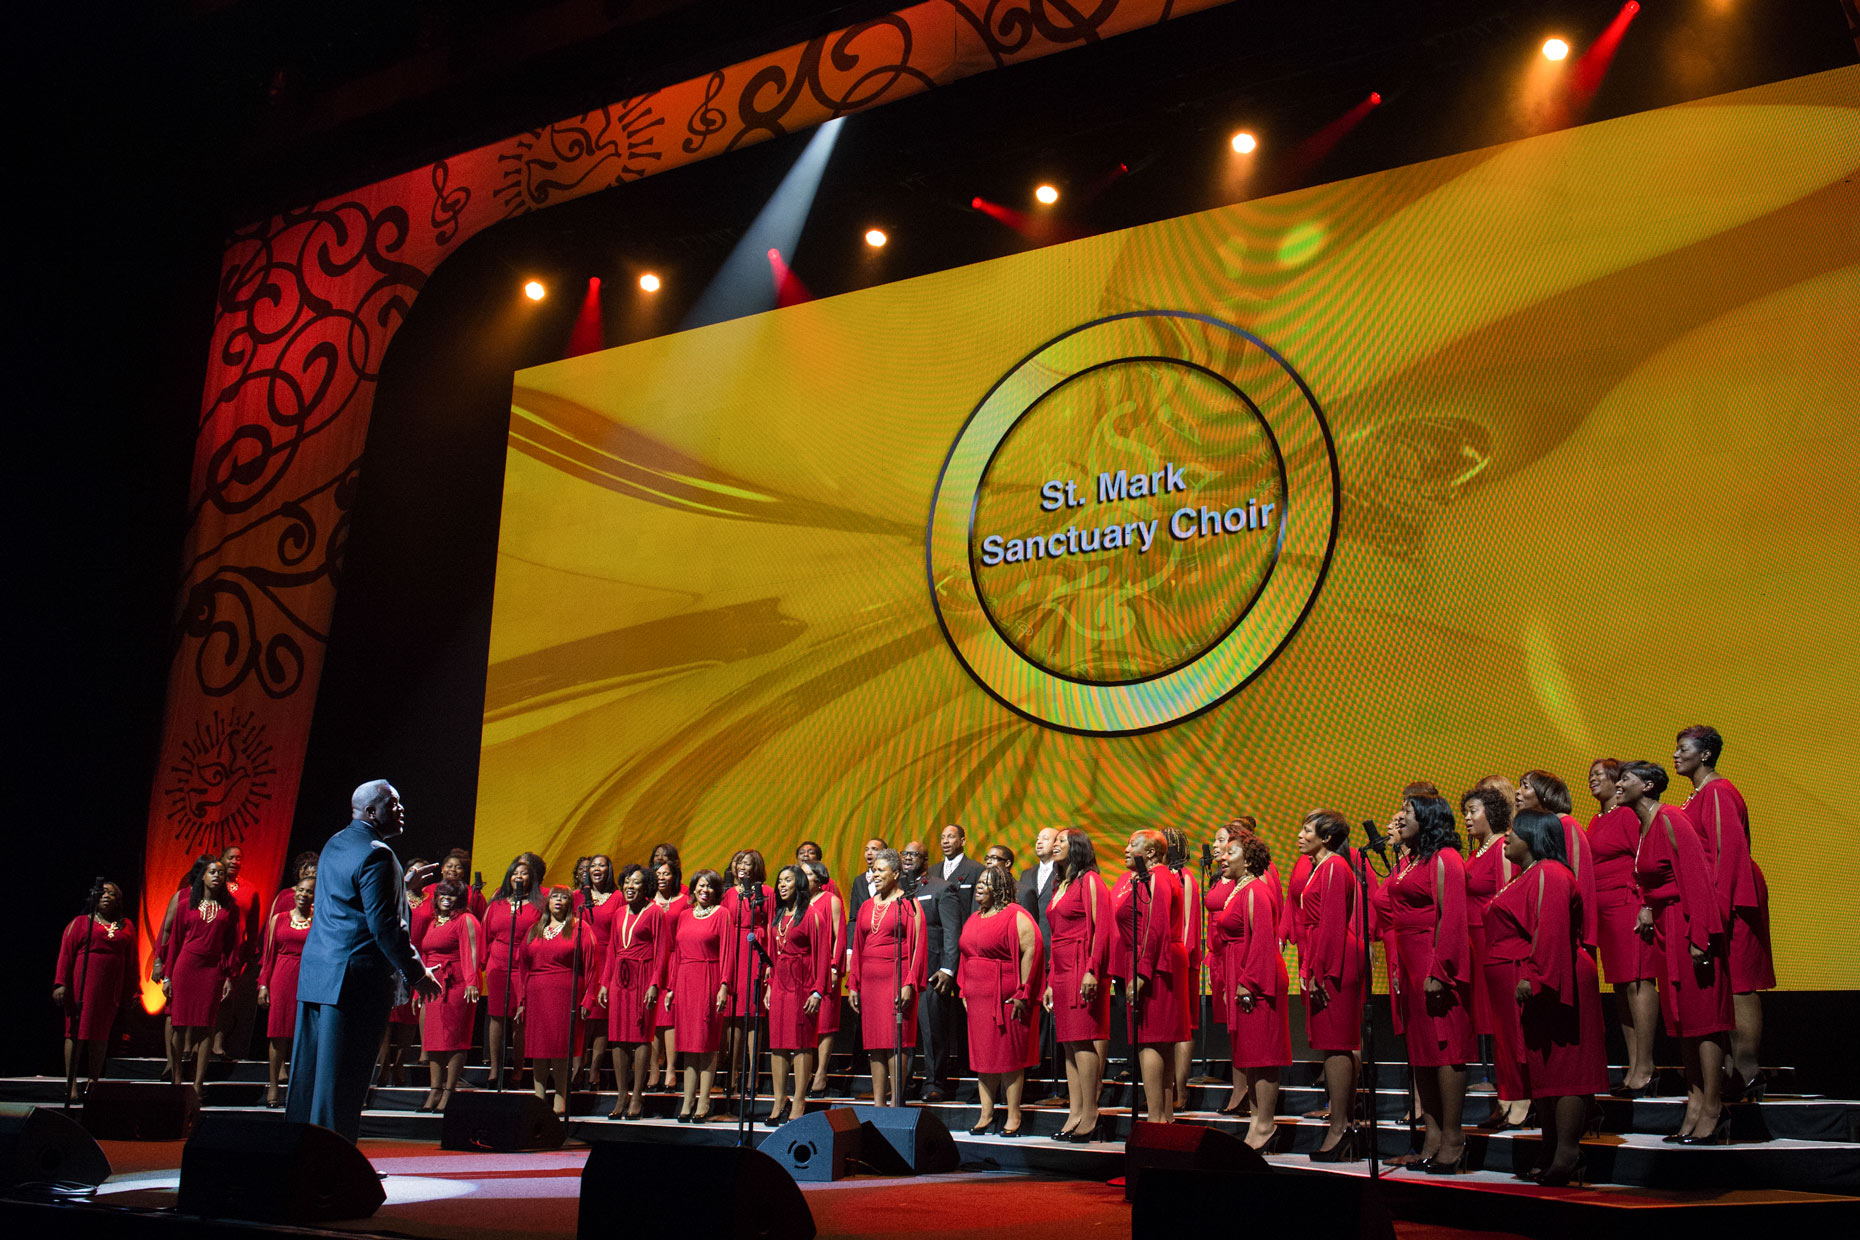 Gospel Choir Competition by Dallas editorial photographer Kevin Brown